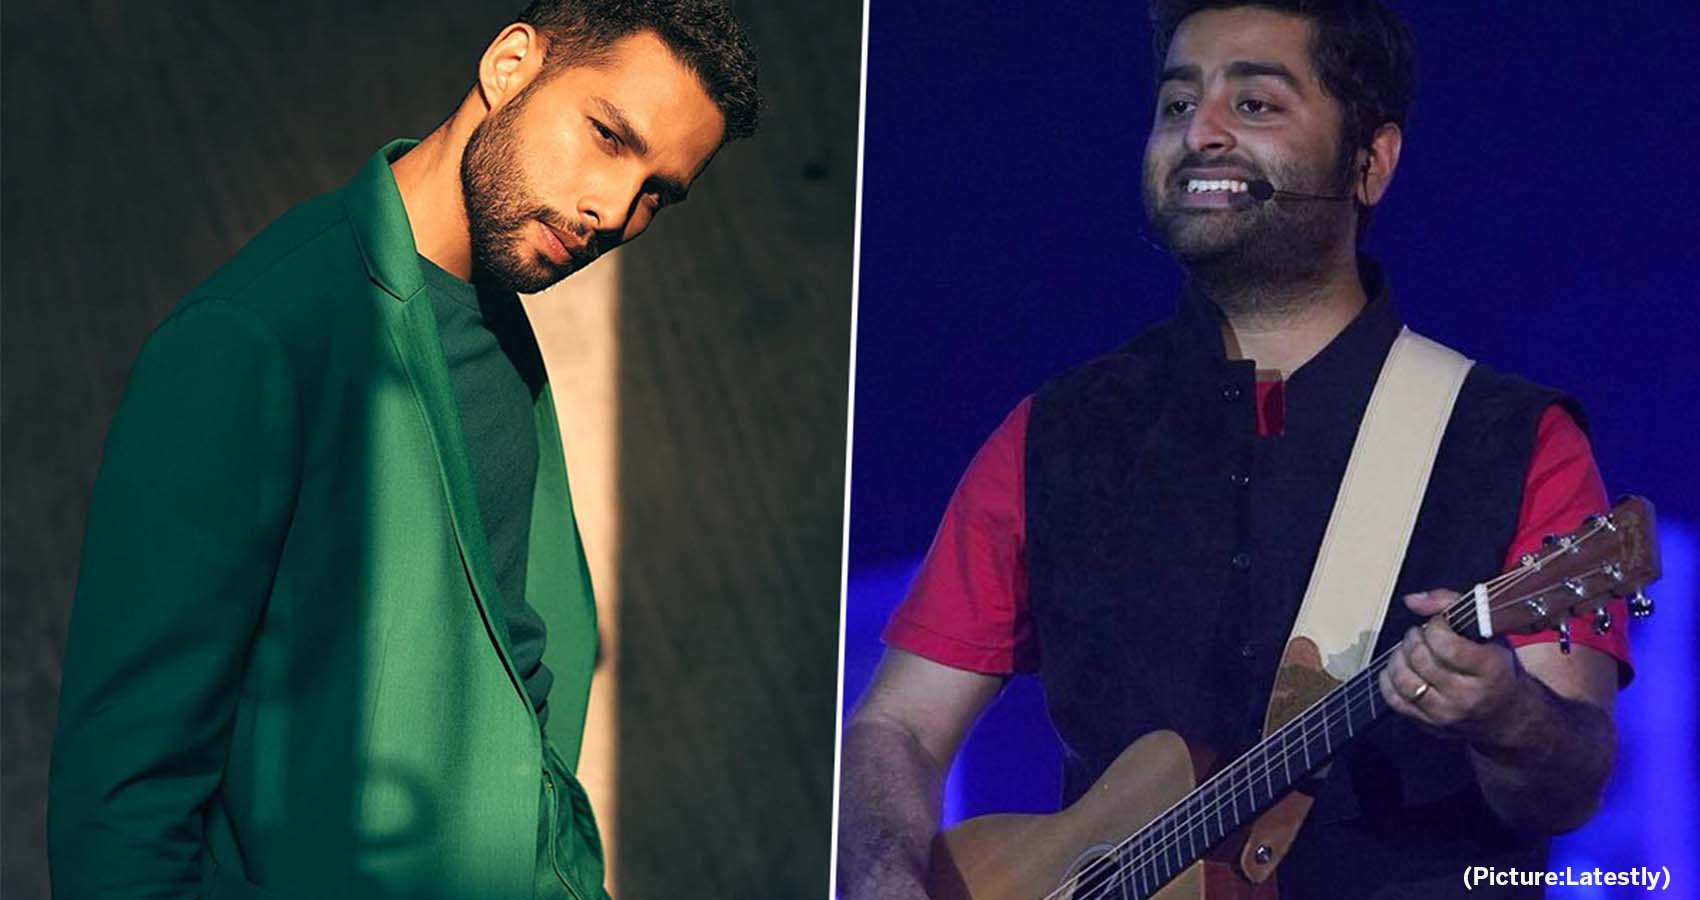 “Fortunate that I have a song sung by Arijit Singh so early in my career!:” Siddhant Chaturvedi